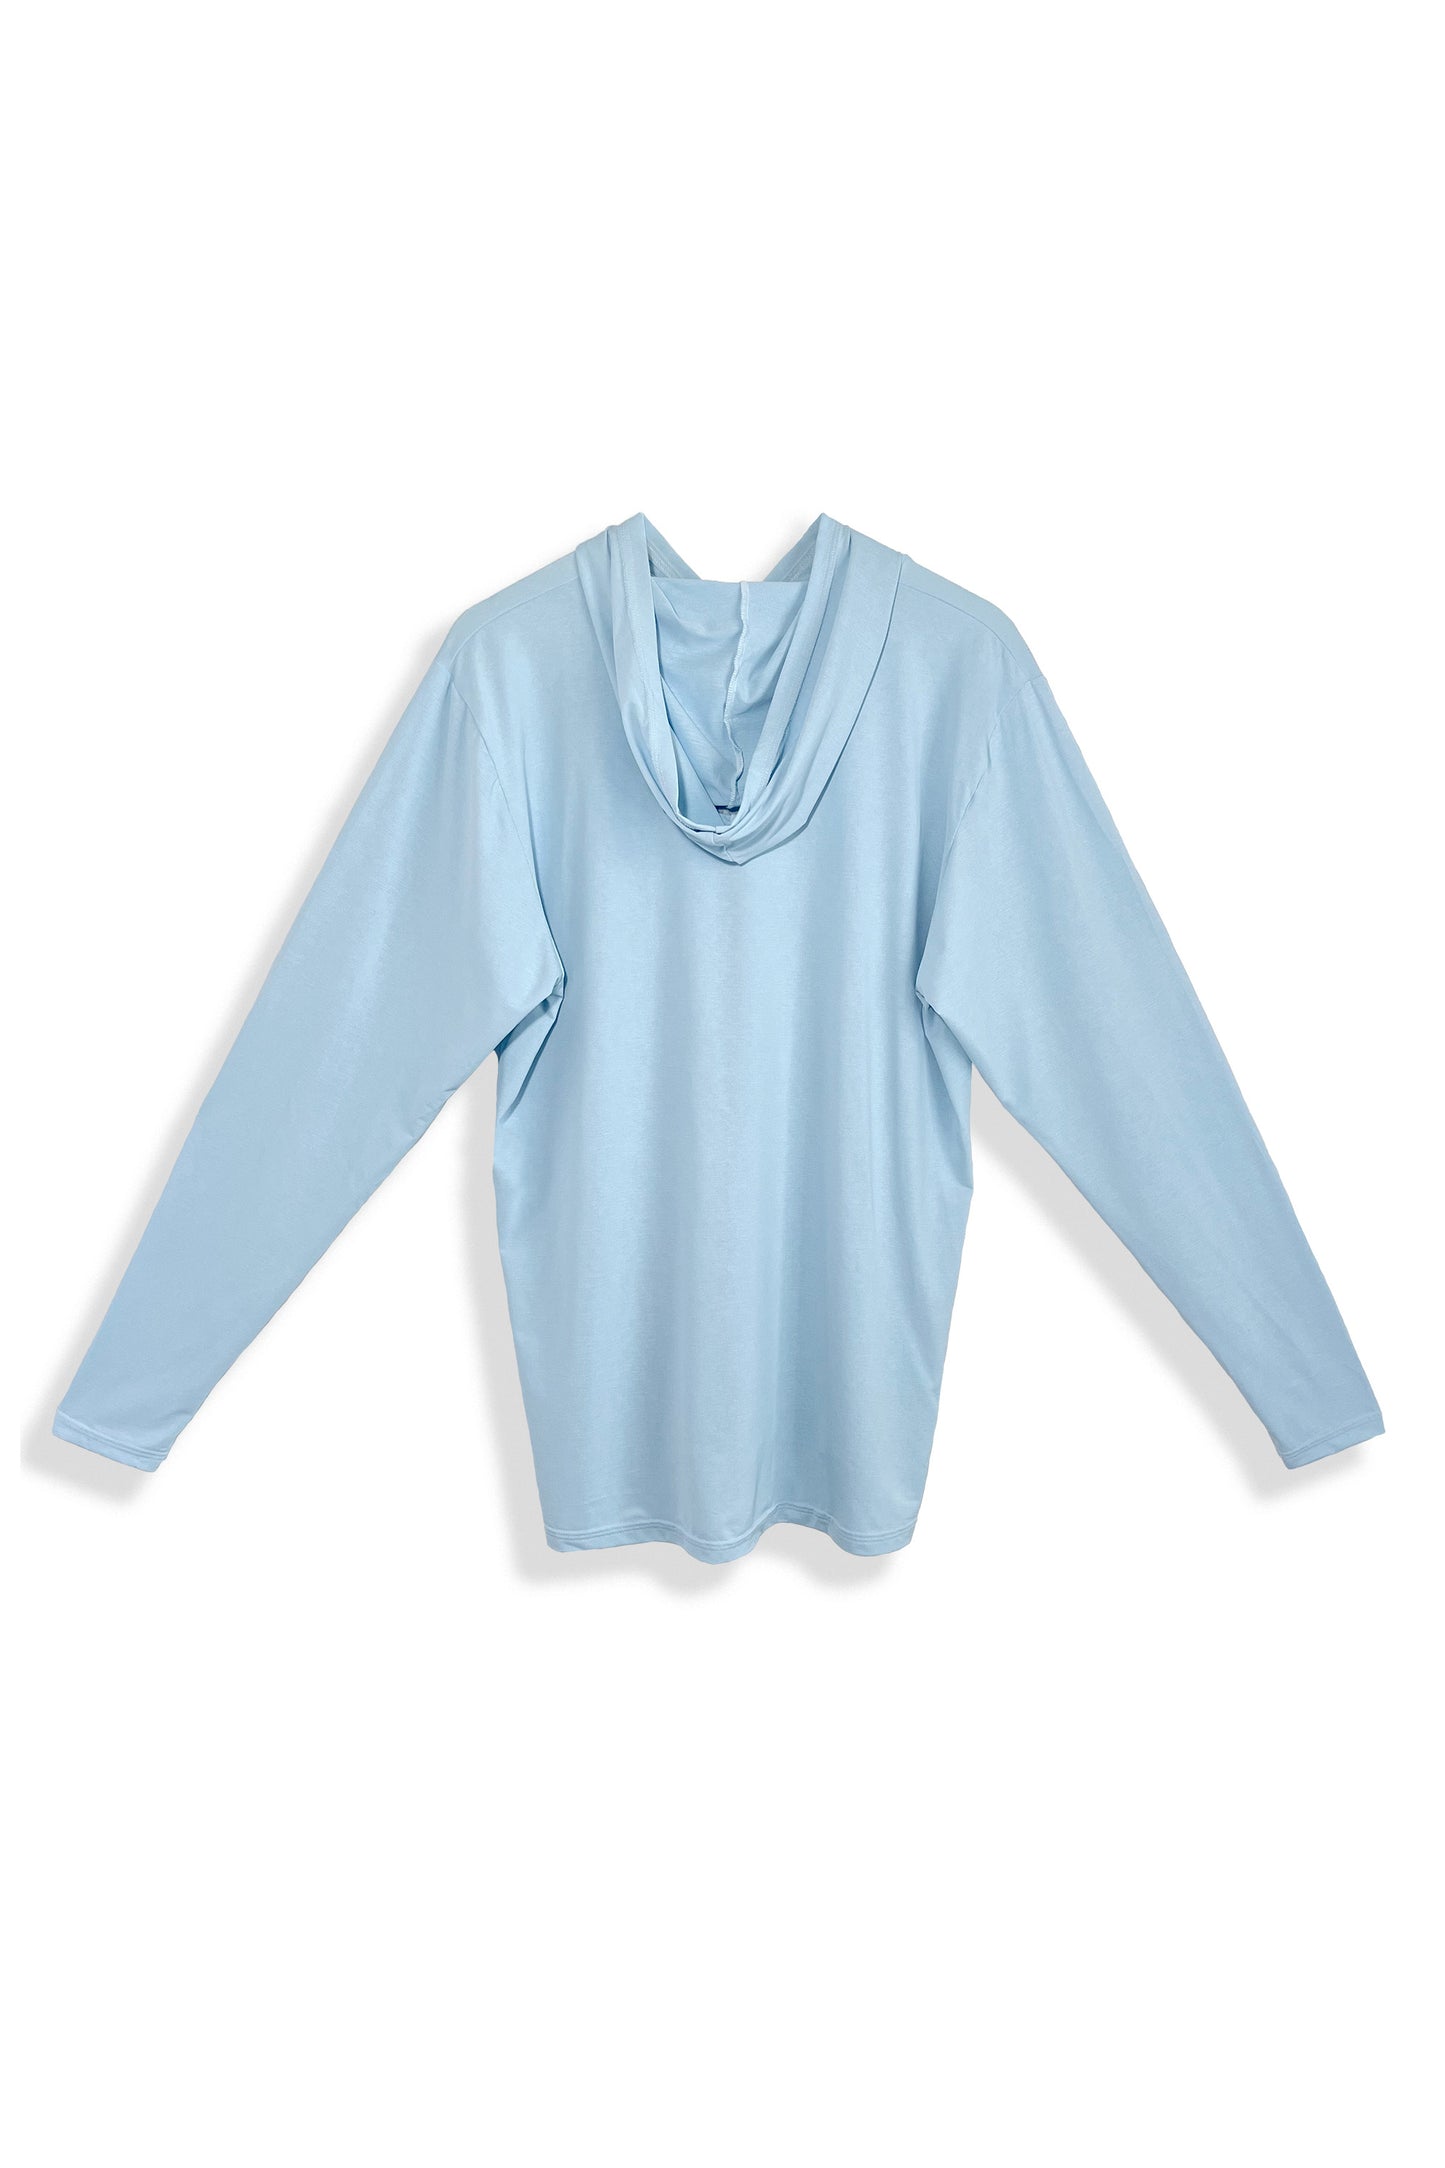 Men's Relaxed Fit Hooded Sun Shirt | Chambray